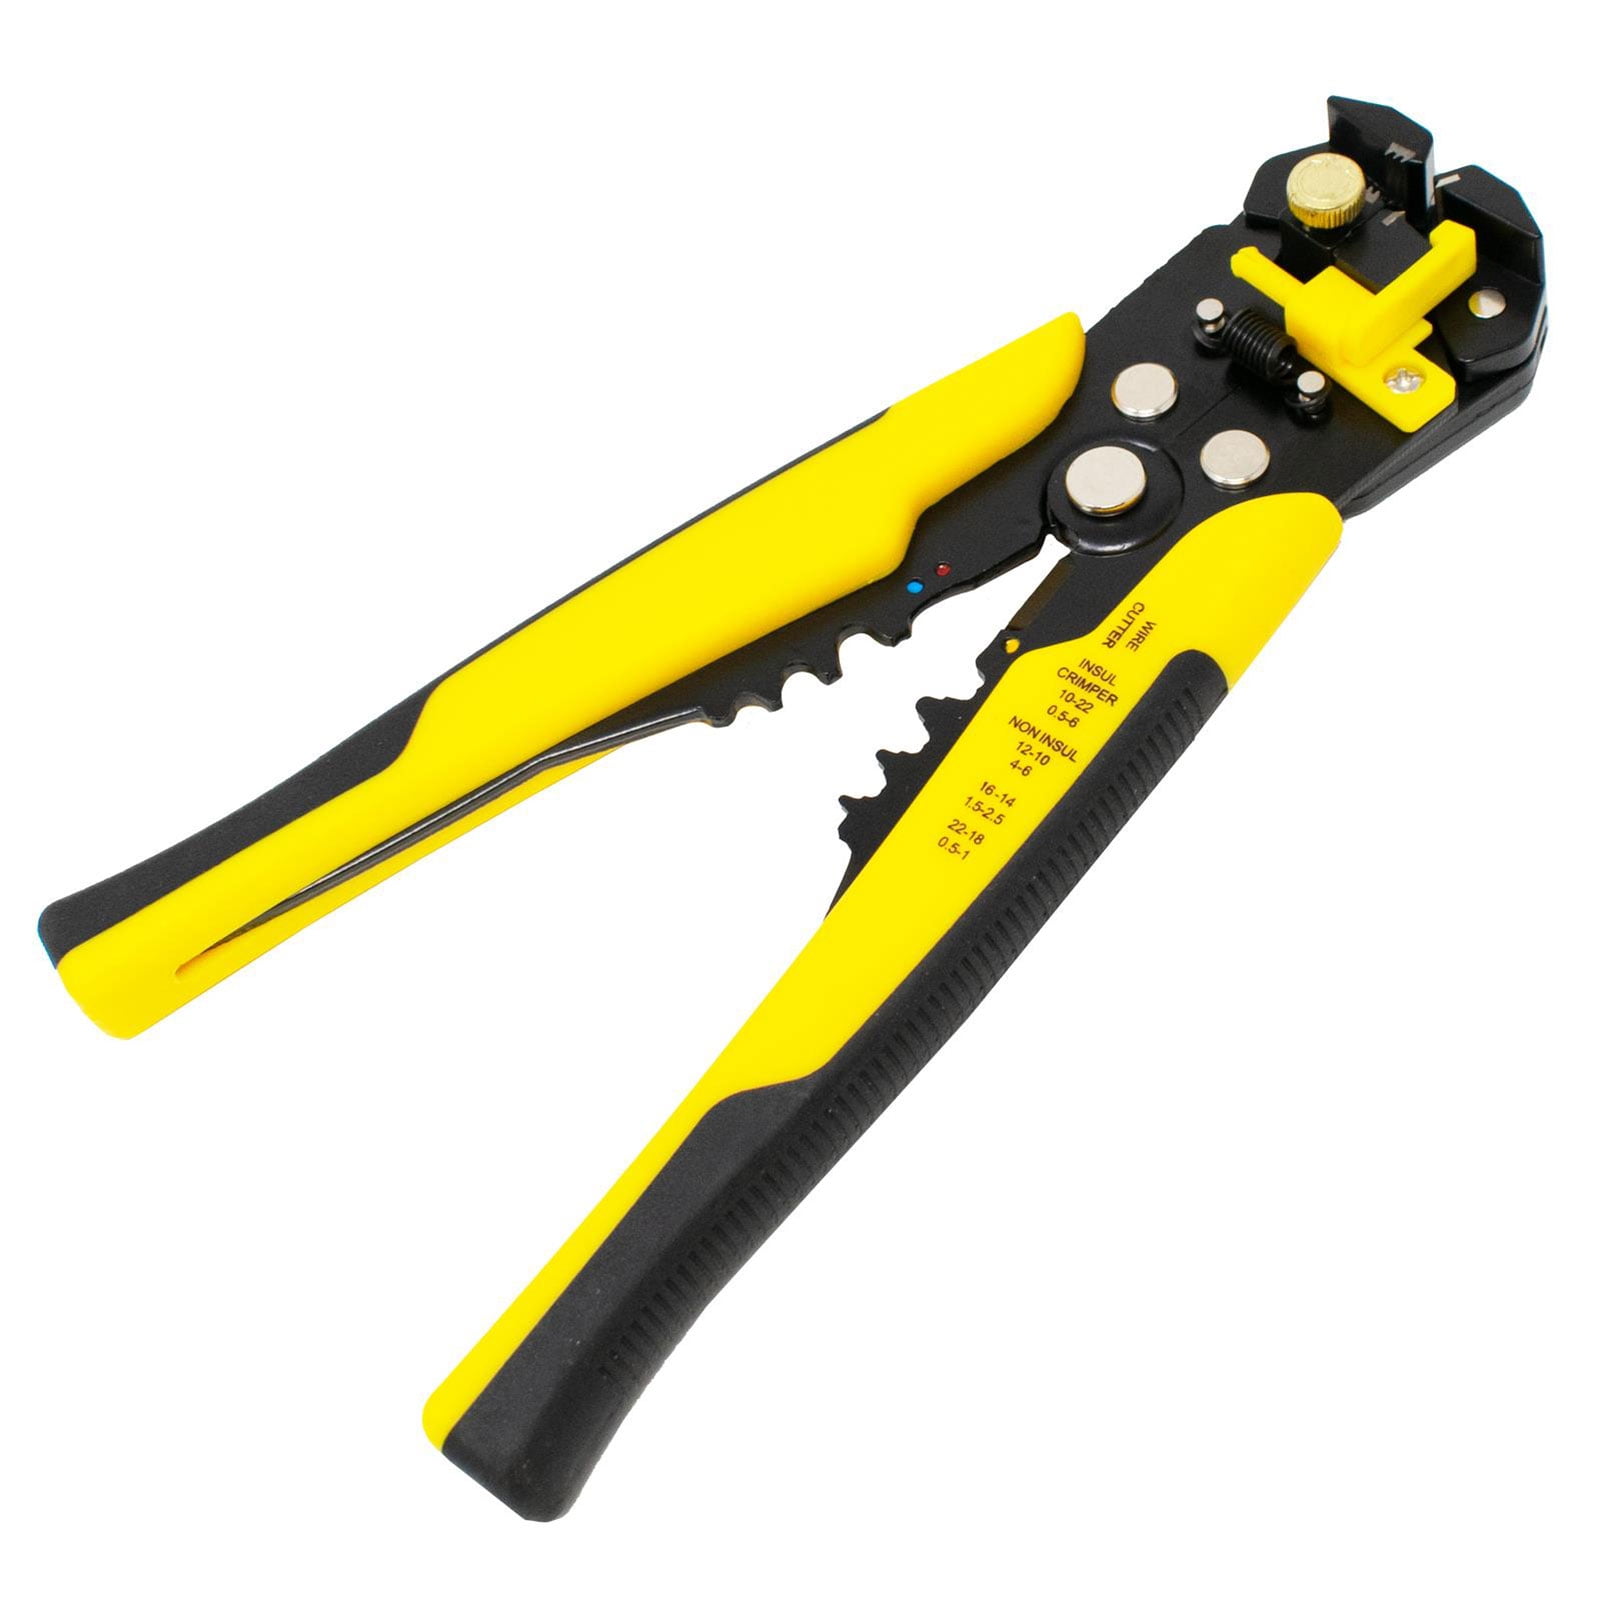 Self Adjusting Insulation Wire stripper/cutter/crimper Cable Stripping Tools 8" 